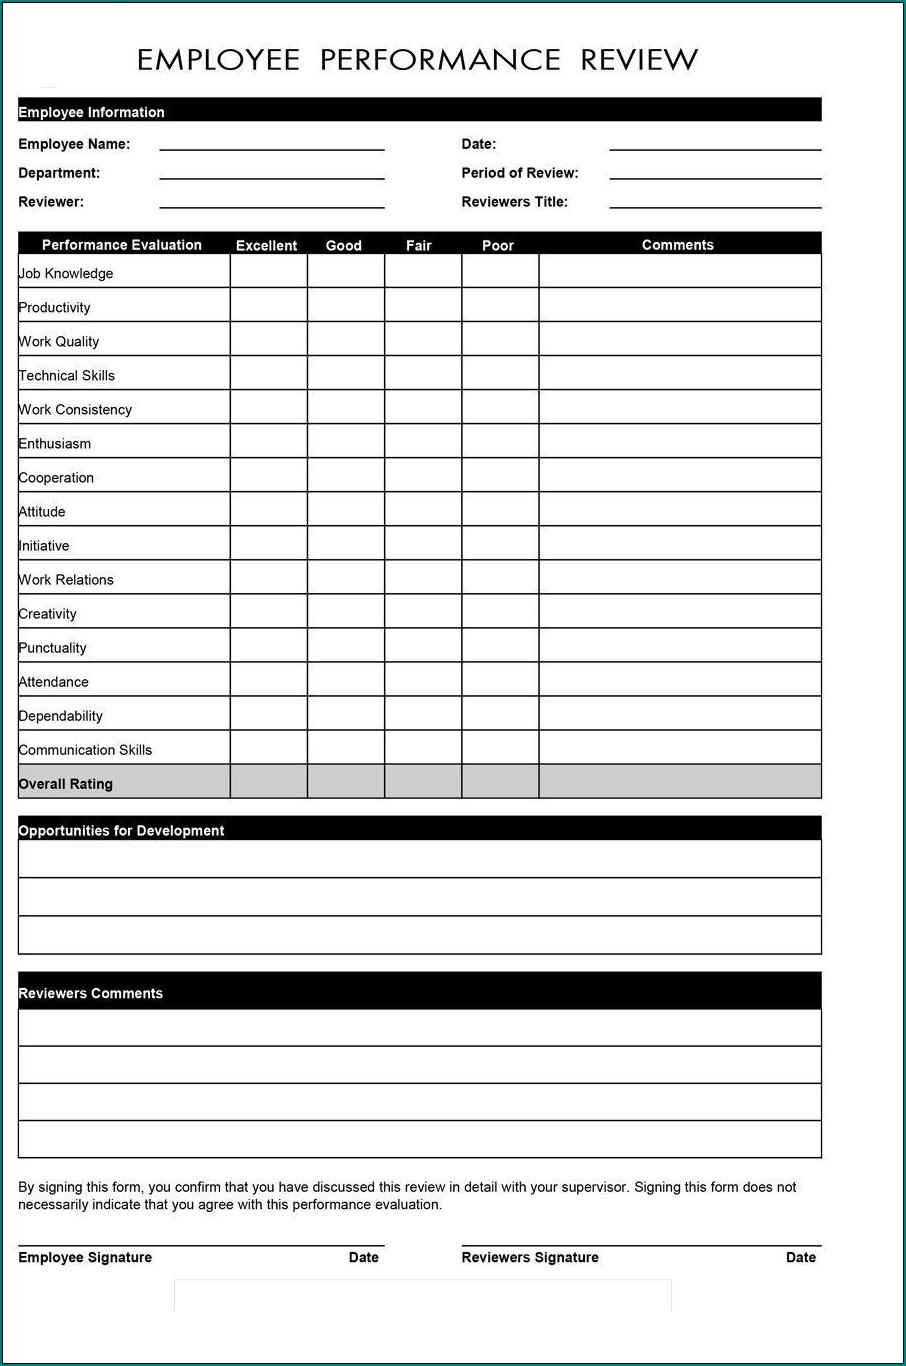 Sample of Employee Review Form